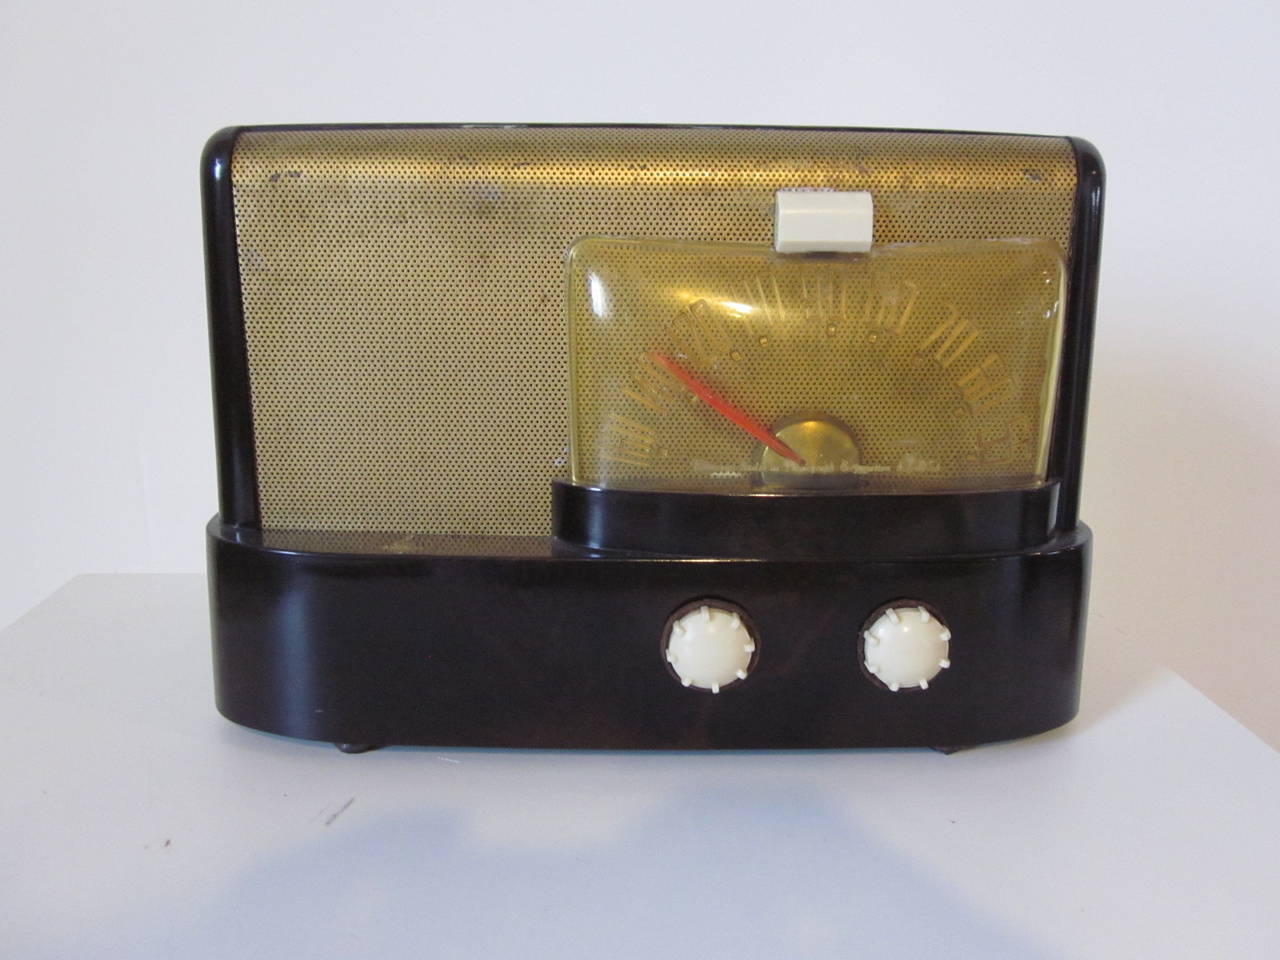 A radio designed by one of the greatest and important American Industrial designers of the 20th century Raymond Loewy. Using the latest materials of the day including plastic and bakelite. A hard to find item in this condition because of the nature